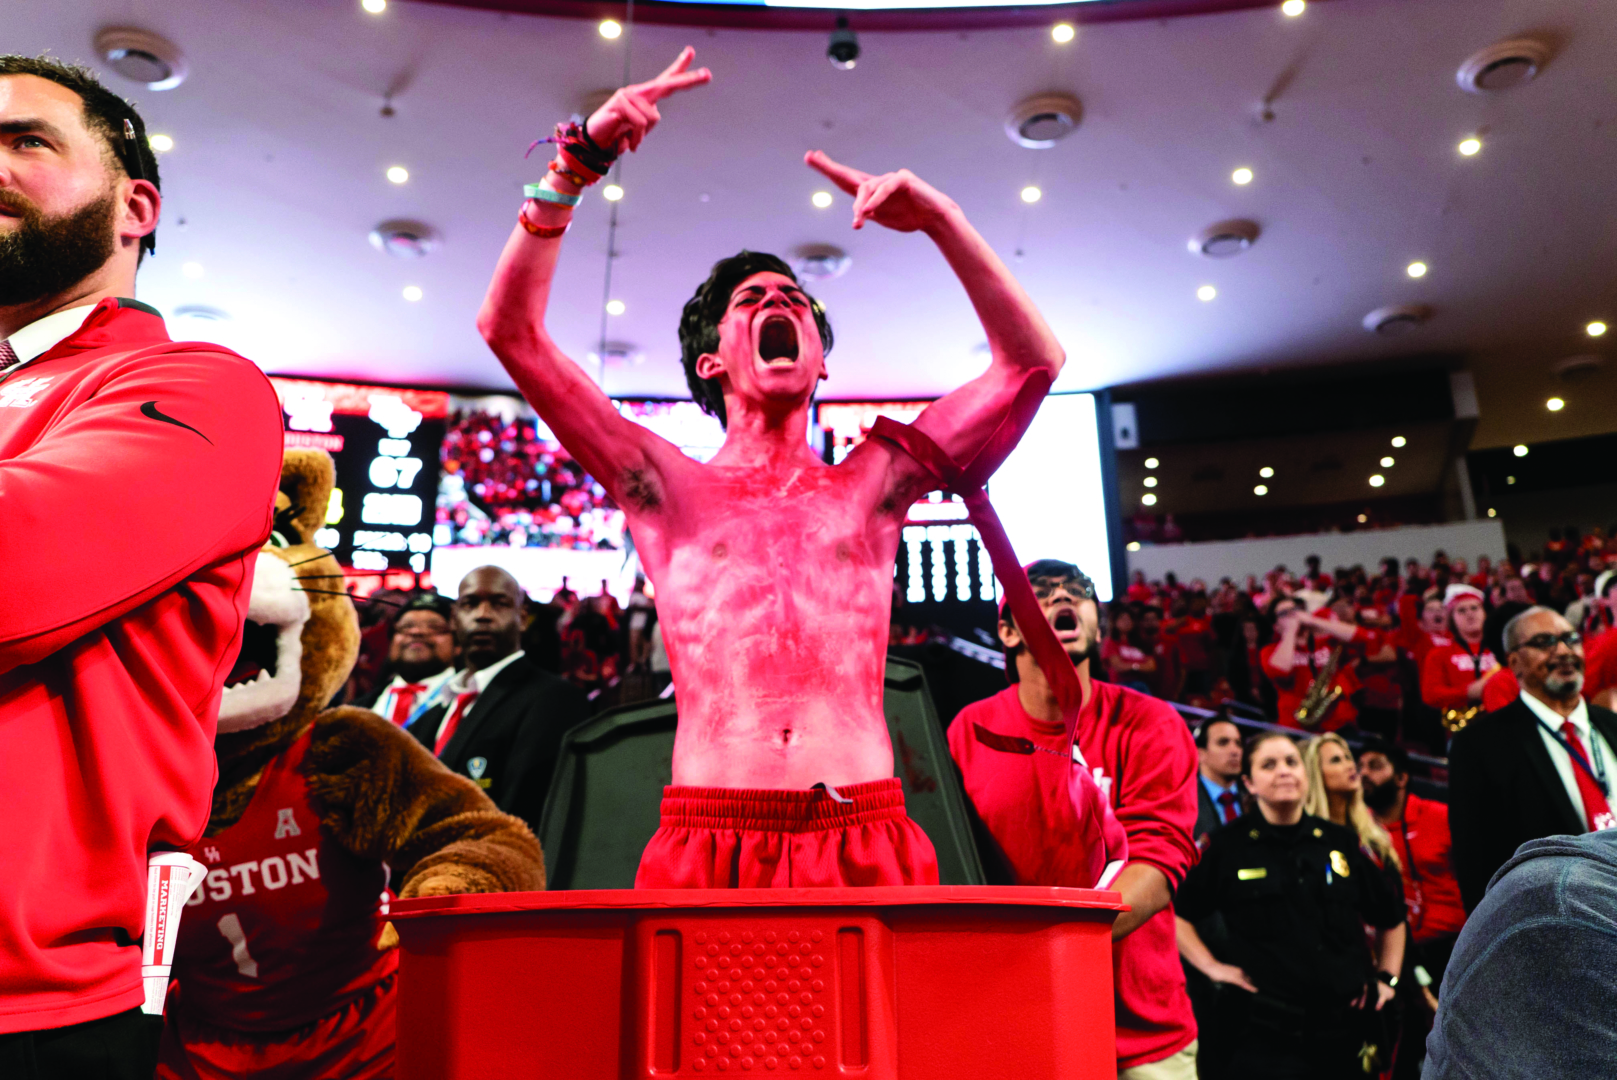 Luis Lemus stands courtside during a basketball game in the red trash can that completes his game-day persona. Lemus portrayed Trash Can Man during several of the men's basketball conference games last season and hopes to continue doing so for the up coming season. | File photo